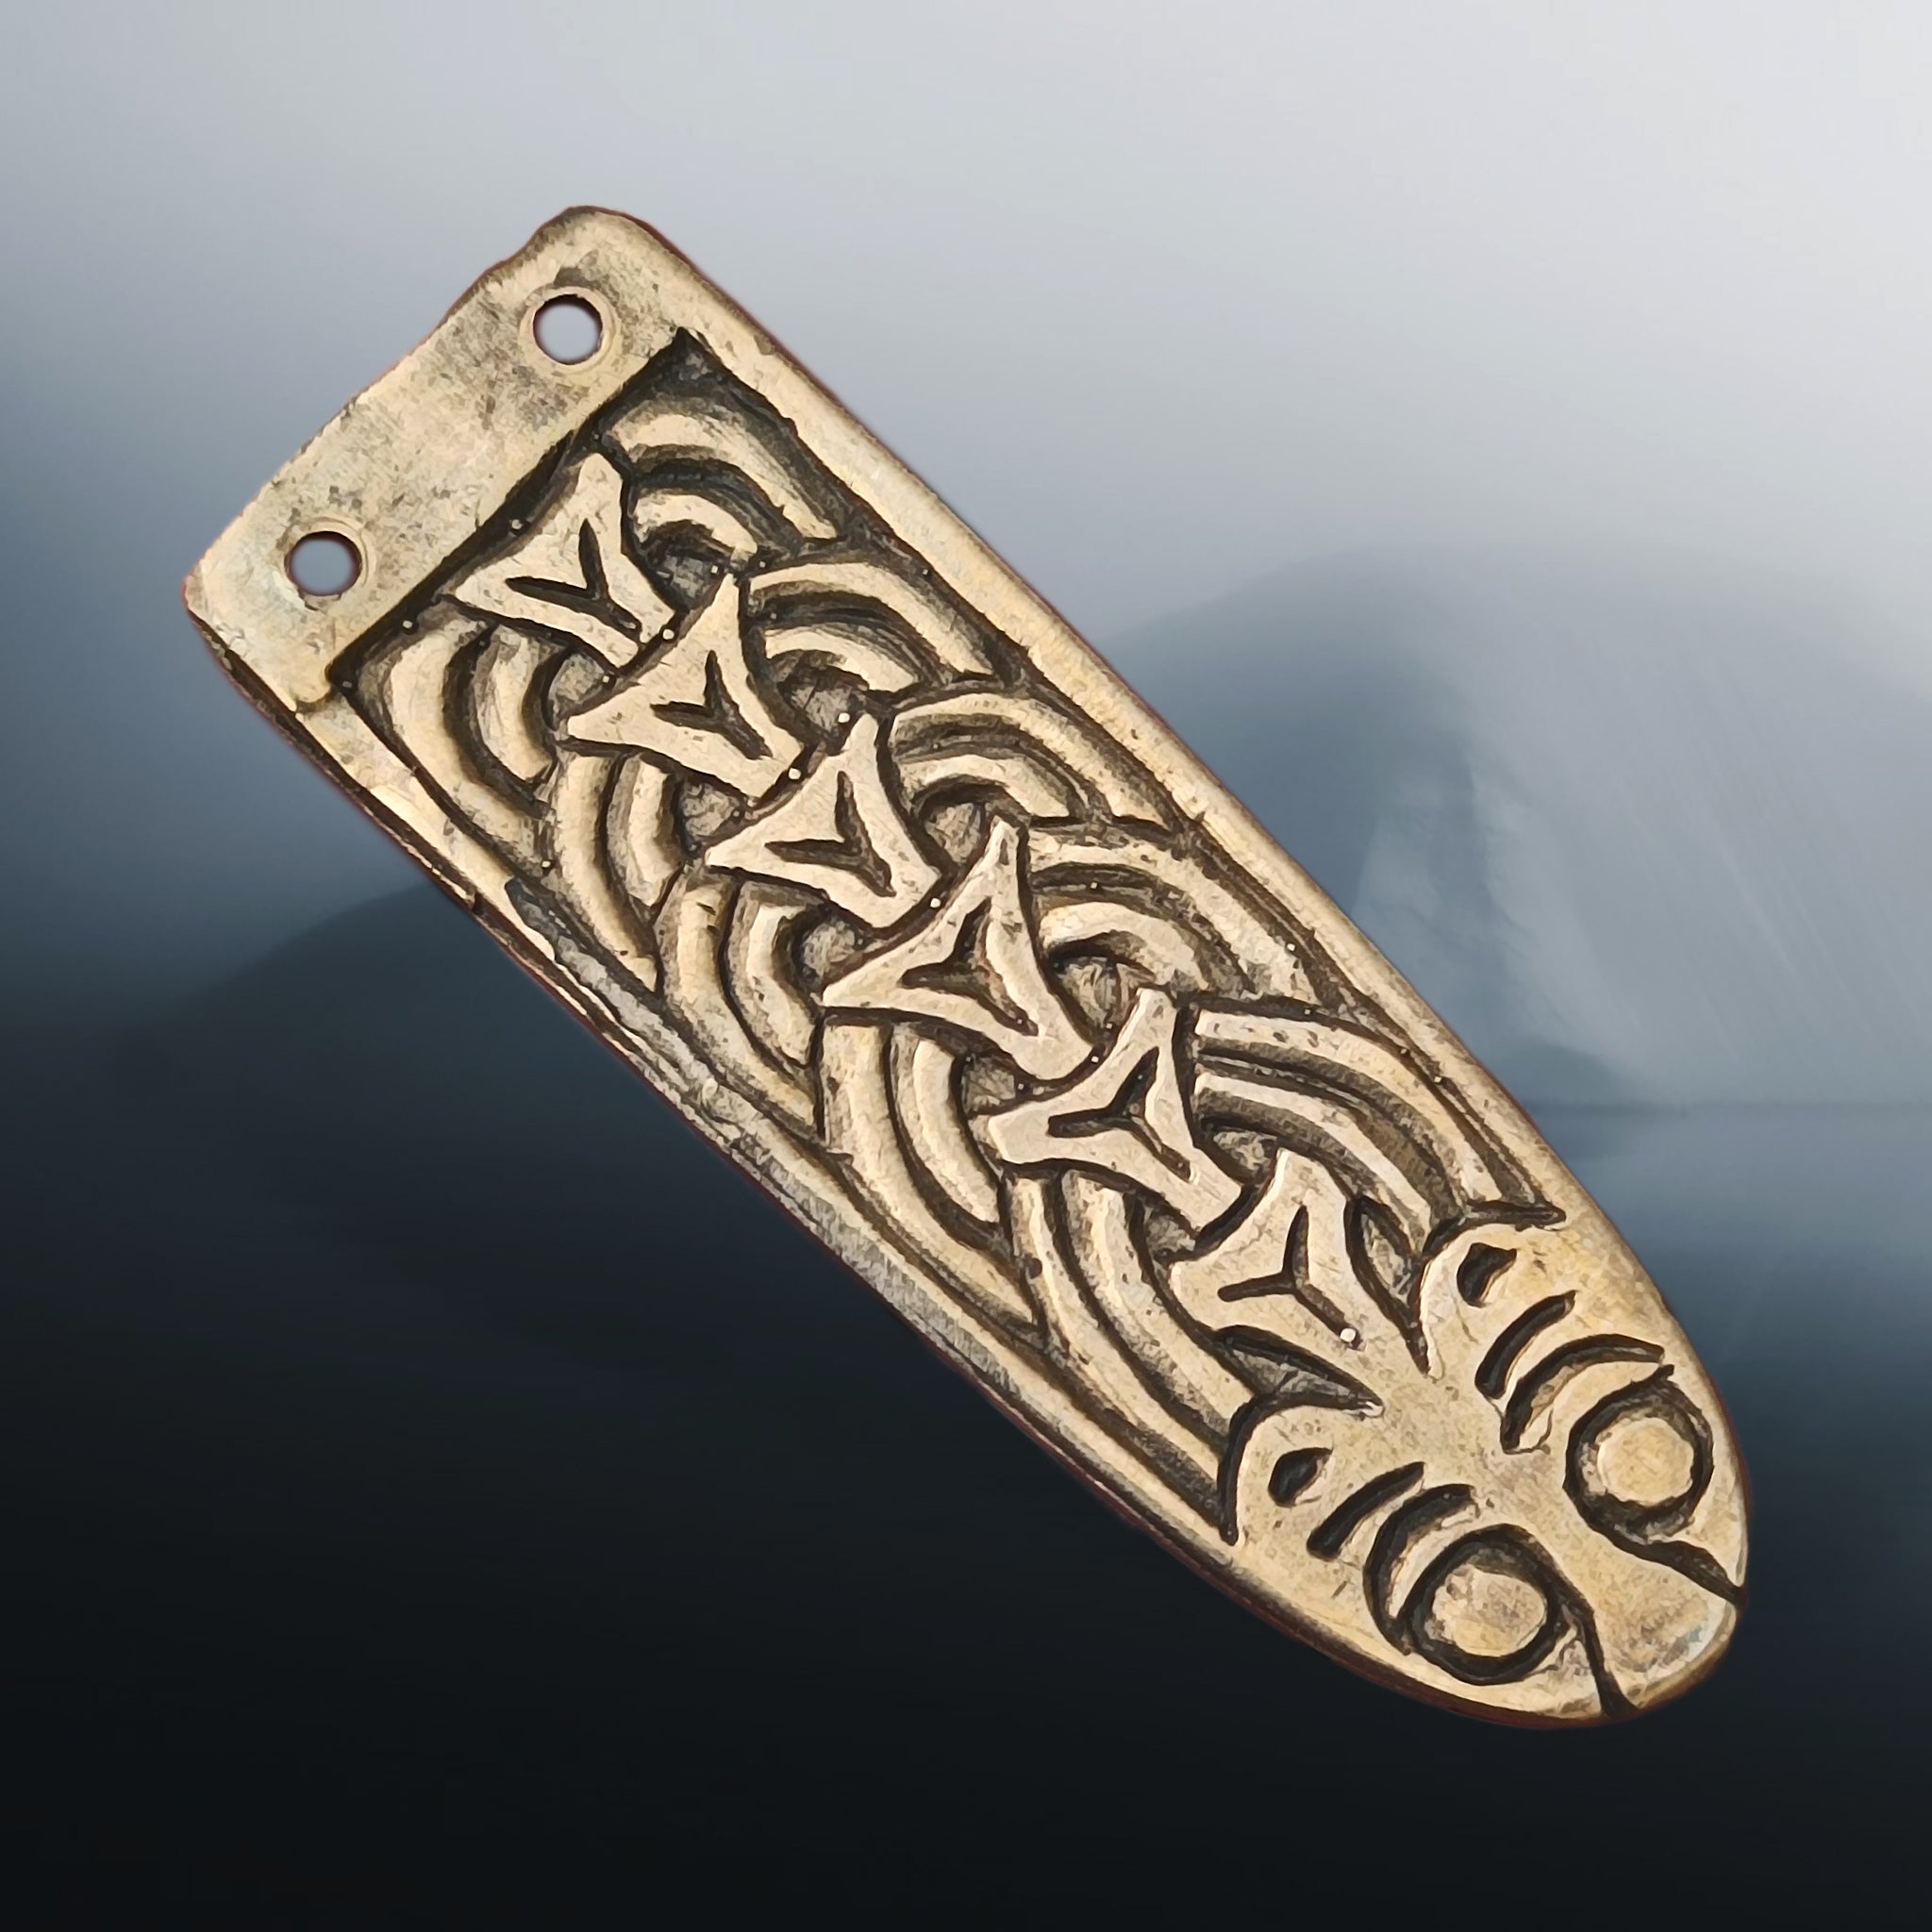 Large Viking Strap End Replica from Borre, Norway